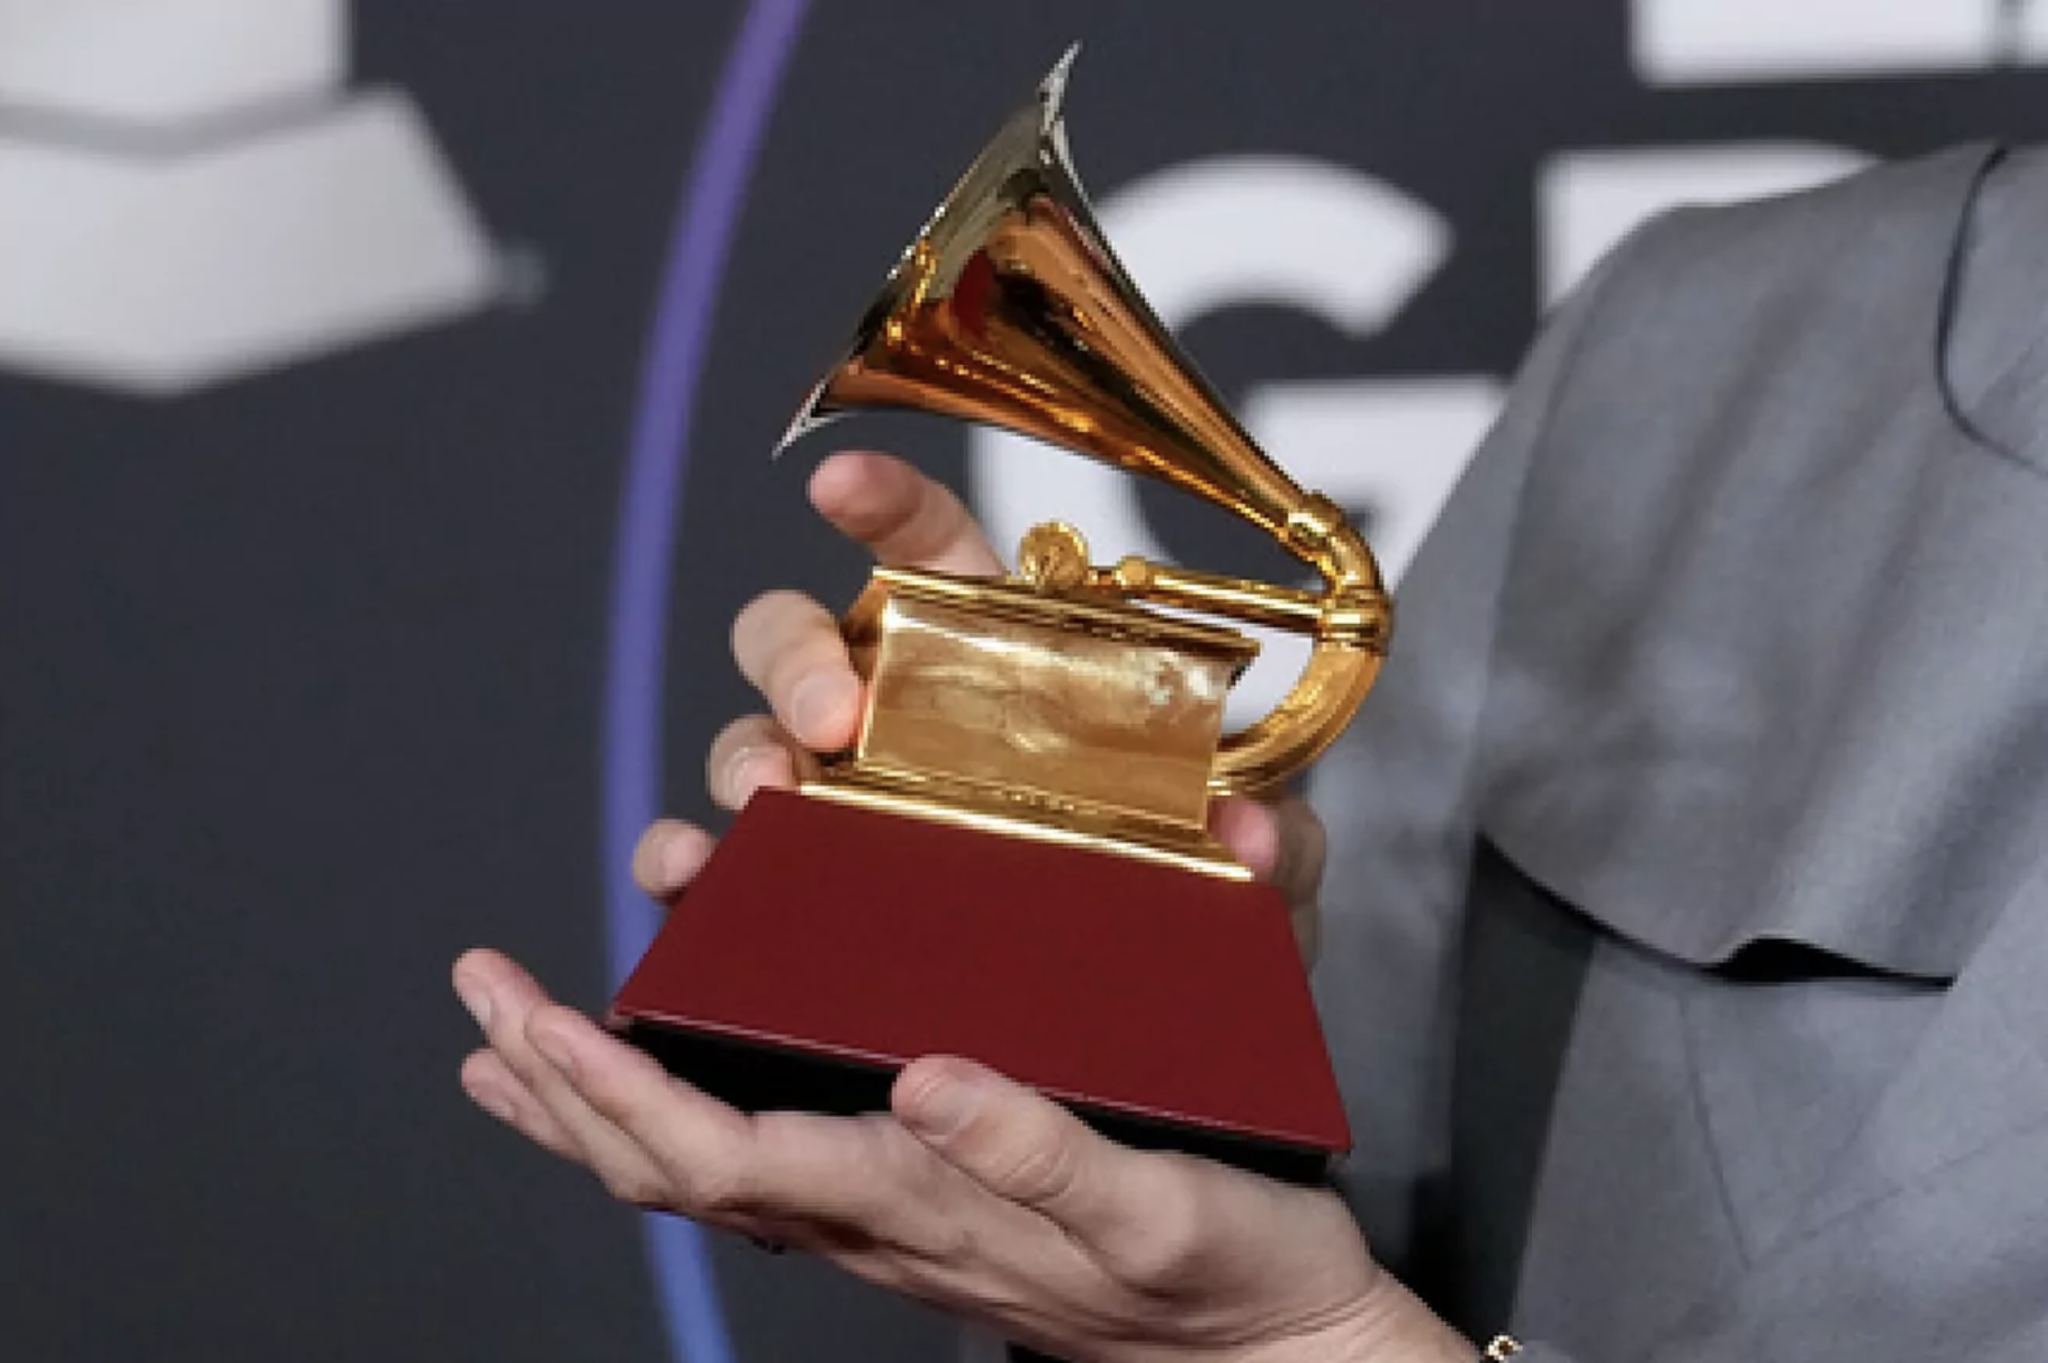 How much is a Latin Grammy worth and how much does the statuette weigh?